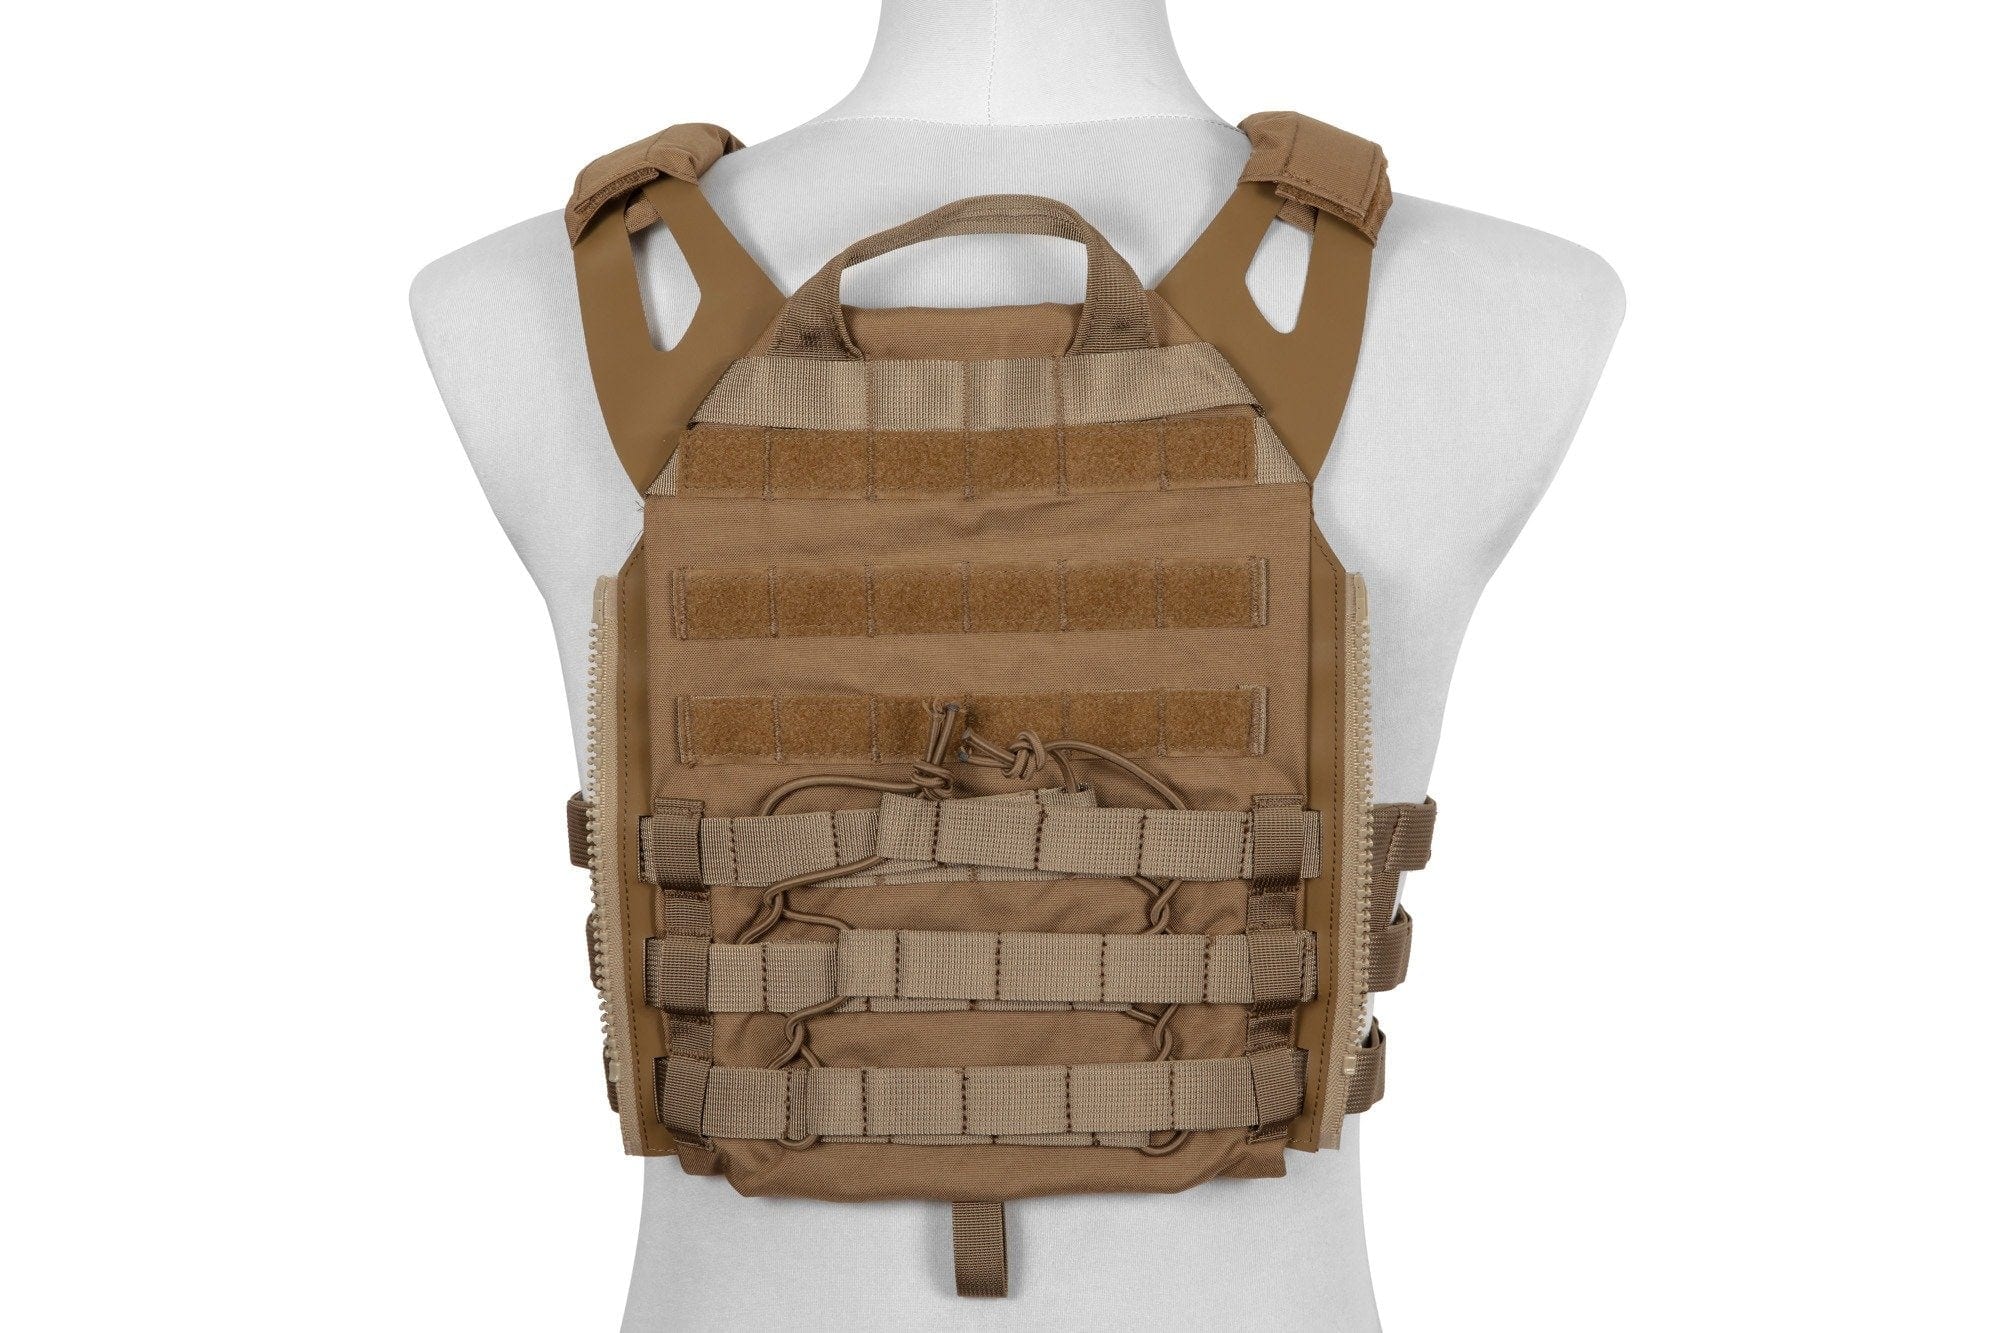 BlueLabel Quick Release Plate Carrier Jump 2.0 Vest - Coyote Brown by Emerson Gear on Airsoft Mania Europe